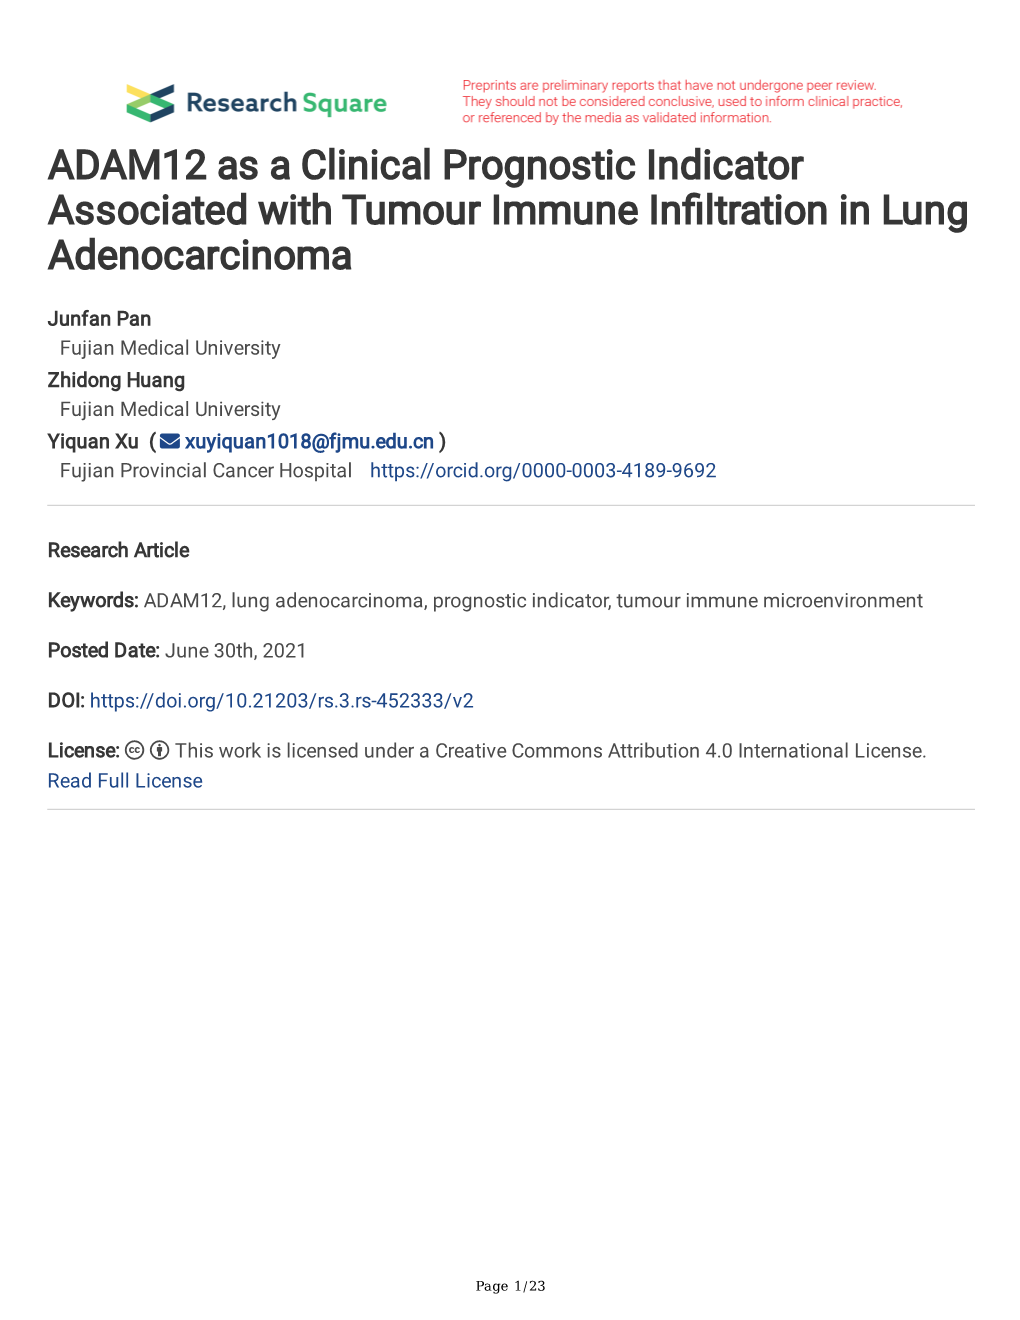 ADAM12 As a Clinical Prognostic Indicator Associated with Tumour Immune Infltration in Lung Adenocarcinoma